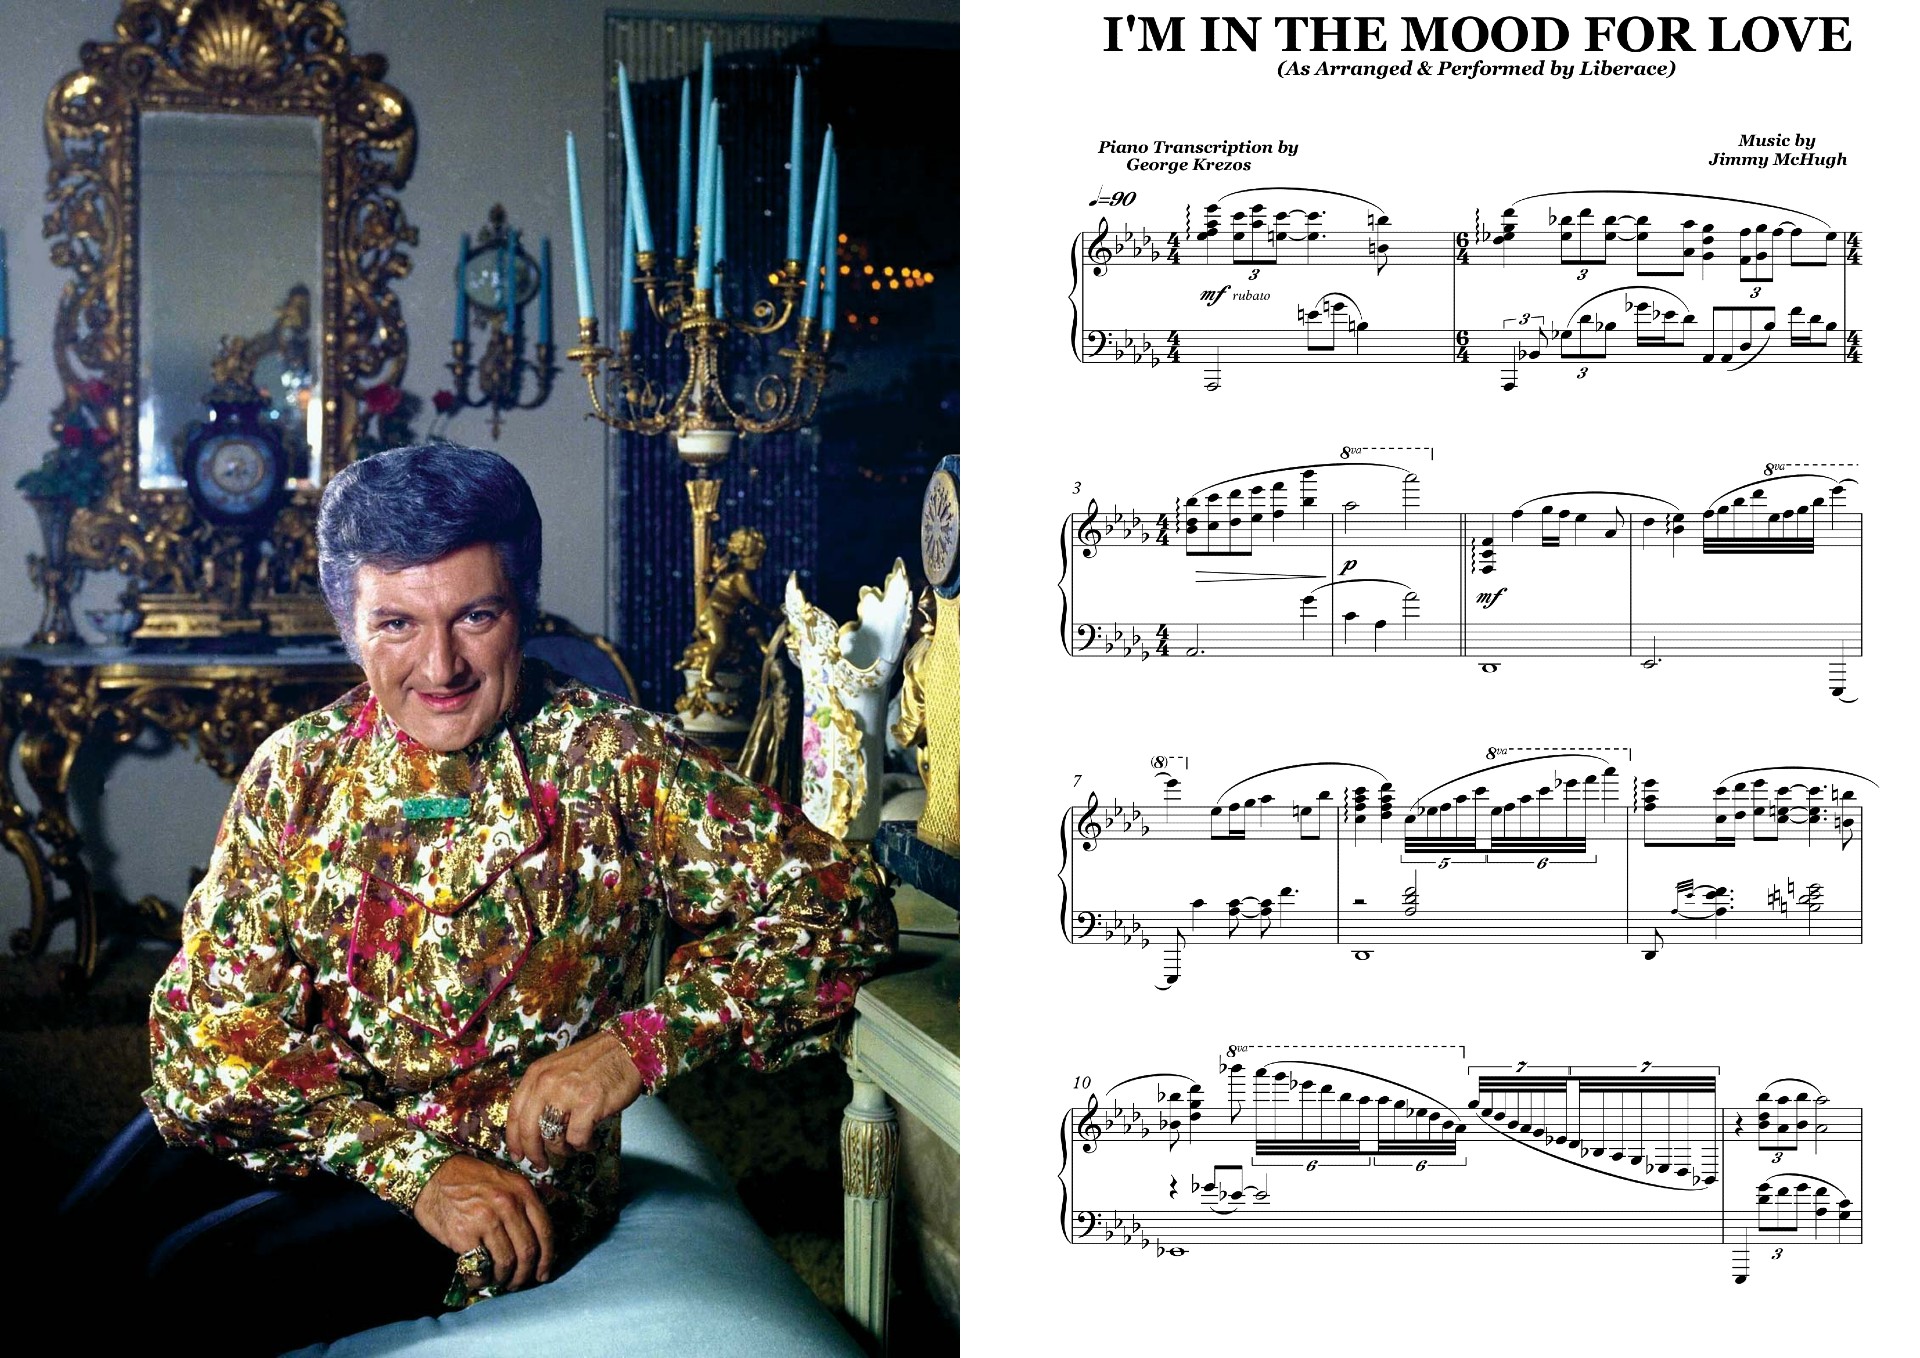 Liberace - I'm in the Mood For Love.jpg